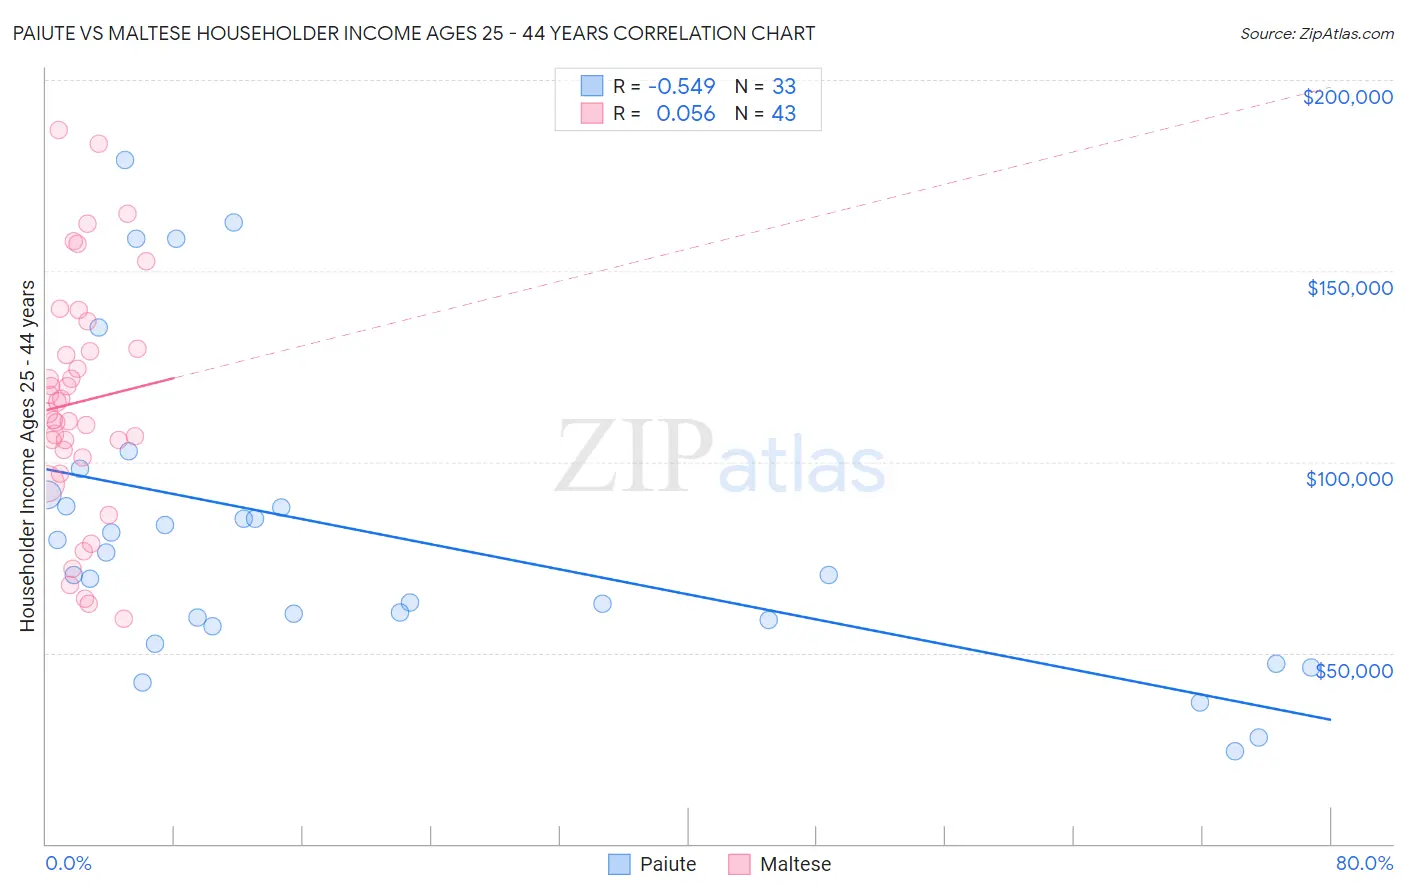 Paiute vs Maltese Householder Income Ages 25 - 44 years